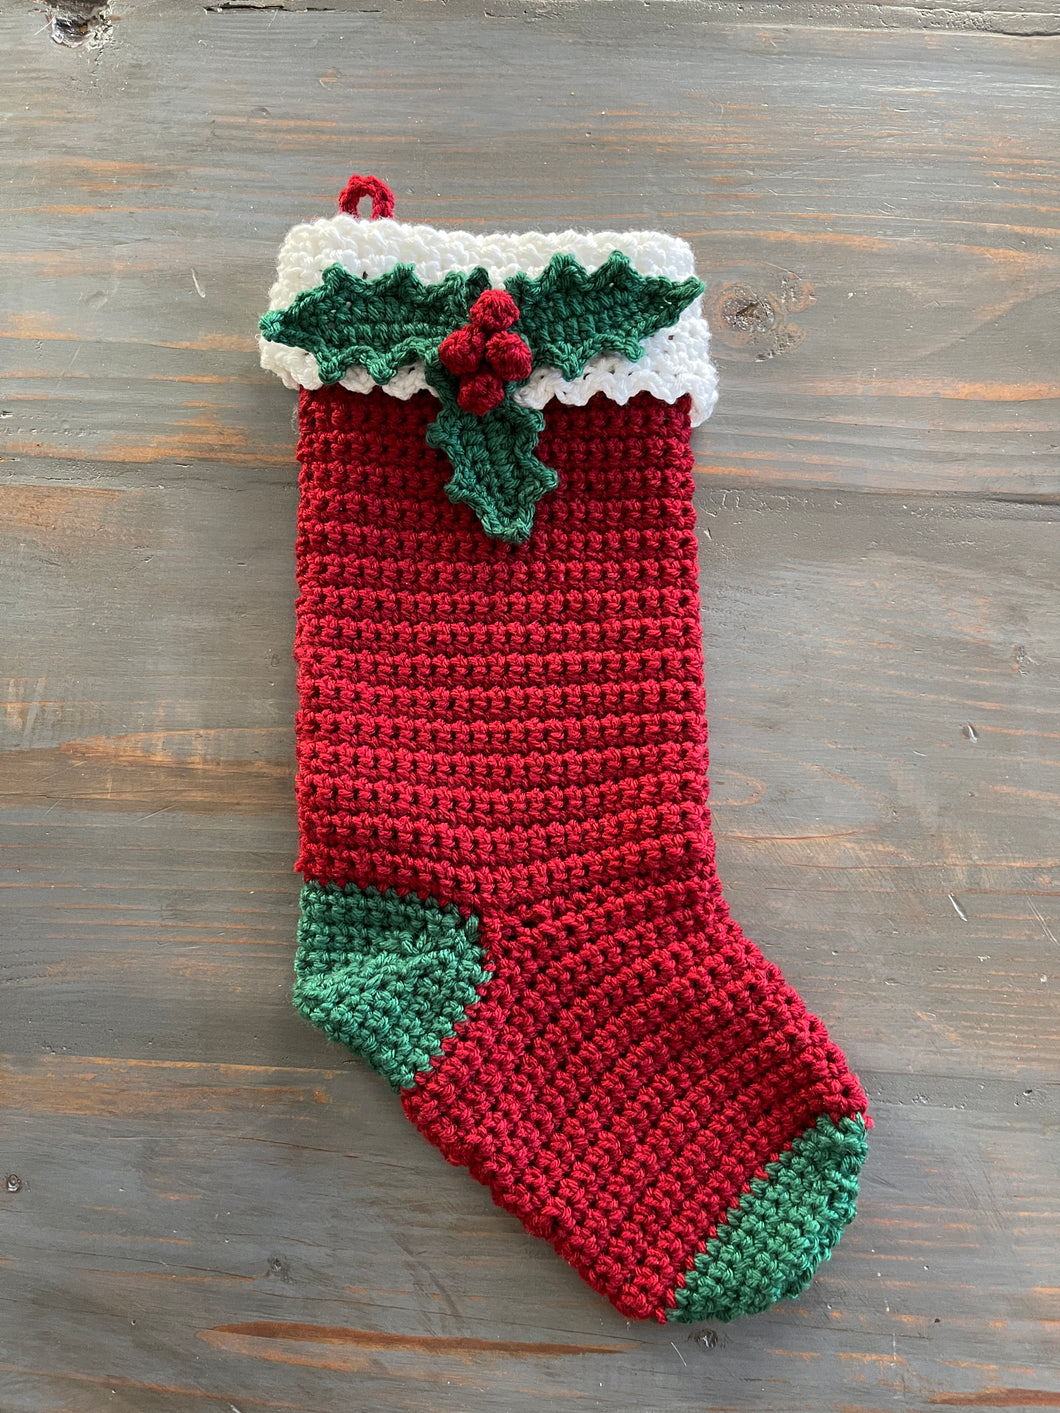 Crochet Christmas Stocking - Holly Leaves and Berries